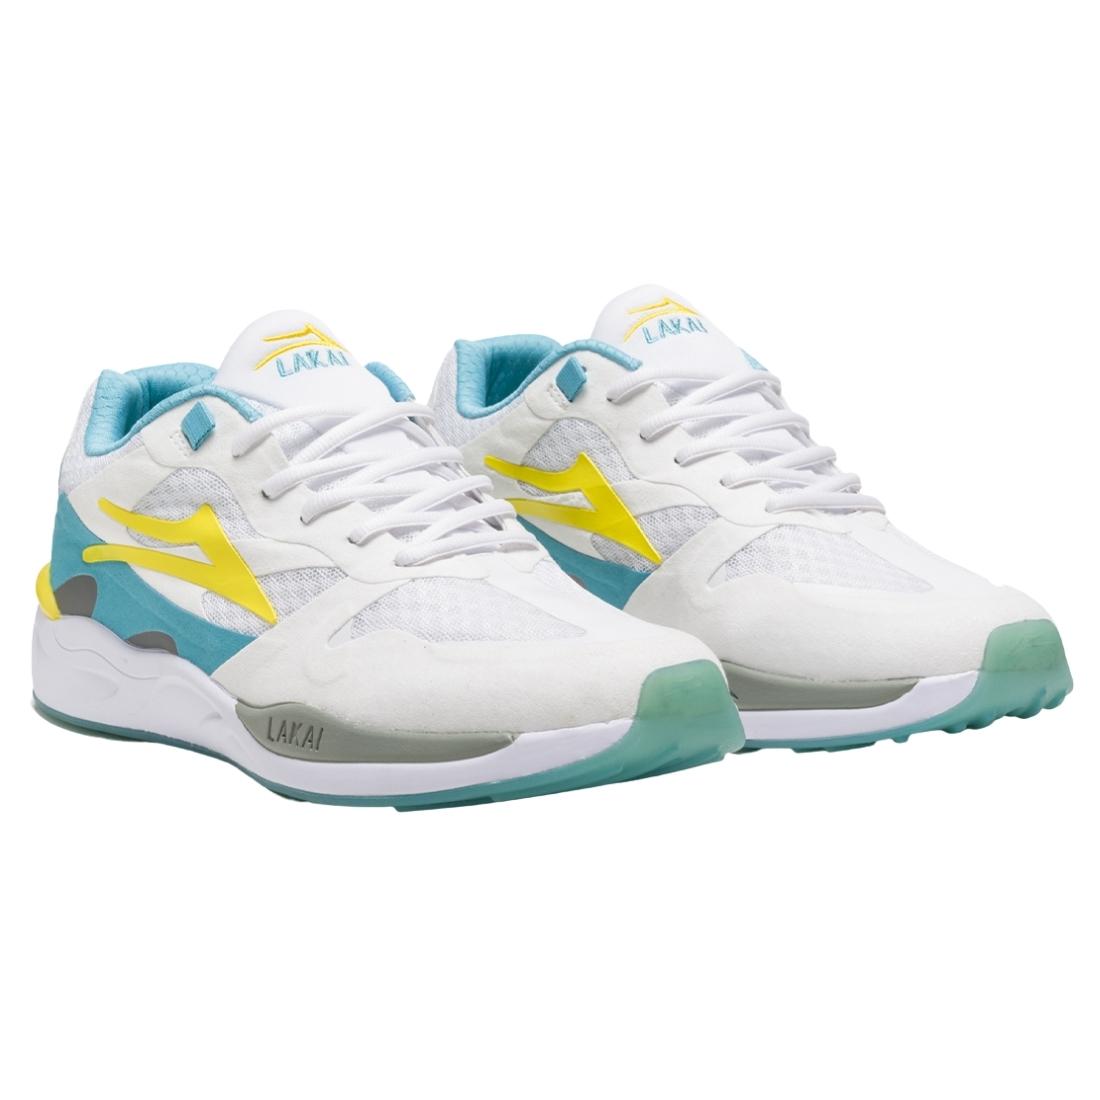 Lakai Evo 2.0 Shoes - White/Teal Suede - Mens Running Shoes/Trainers by Lakai